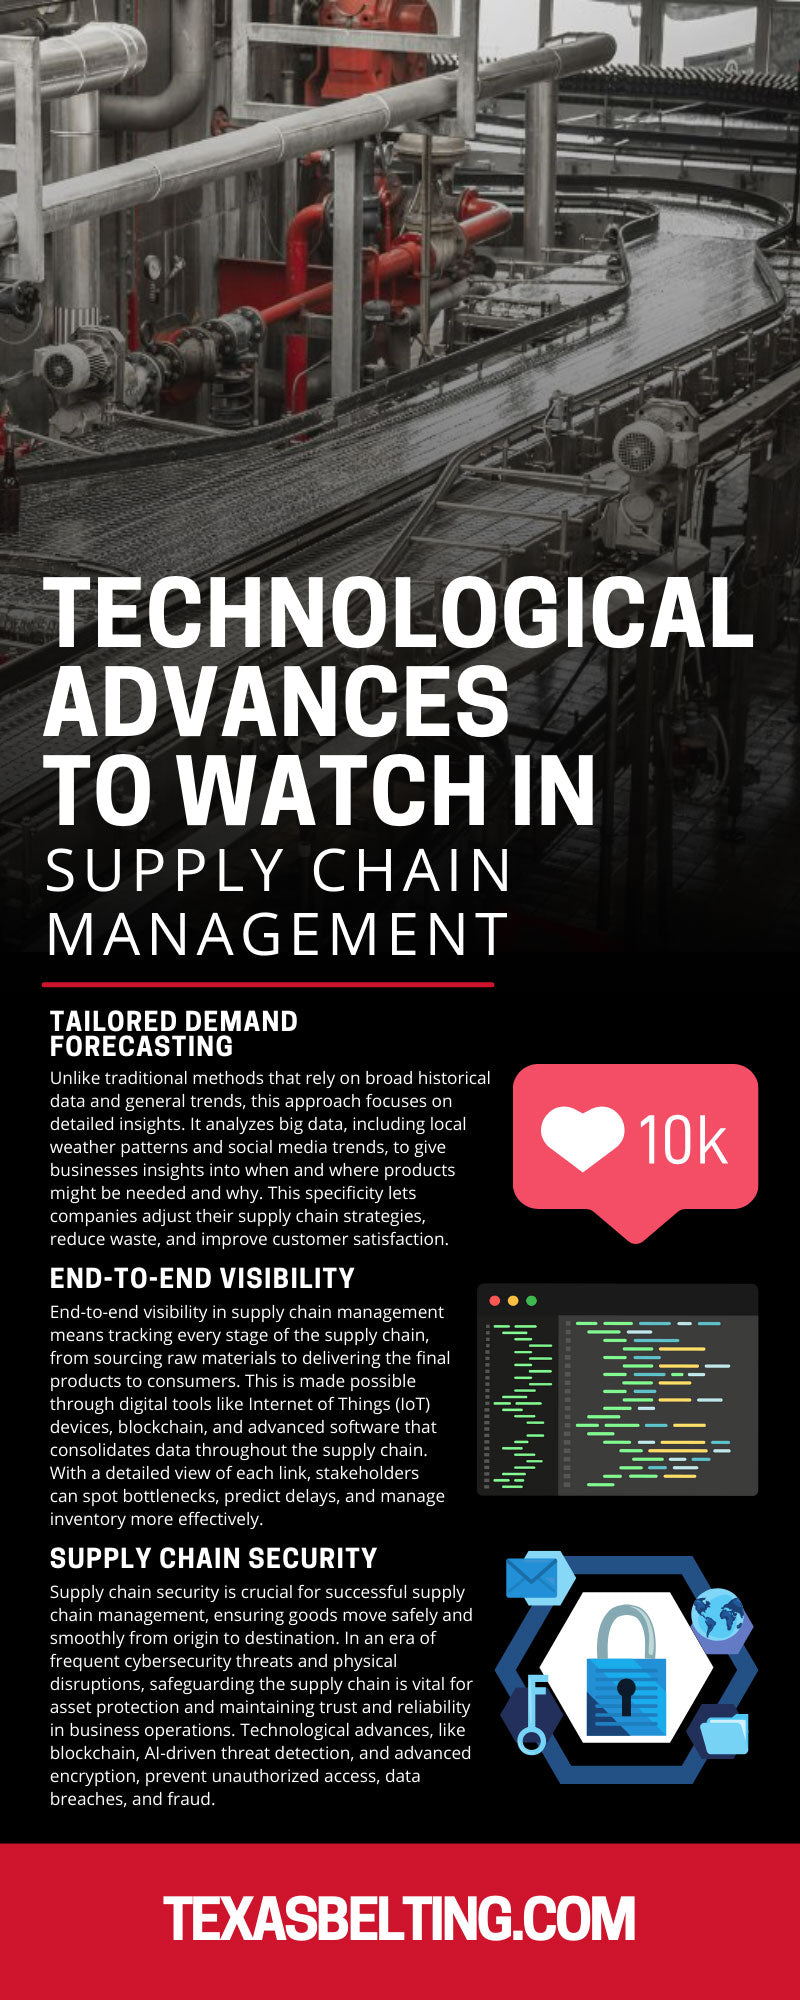 Technological Advances To Watch in Supply Chain Management